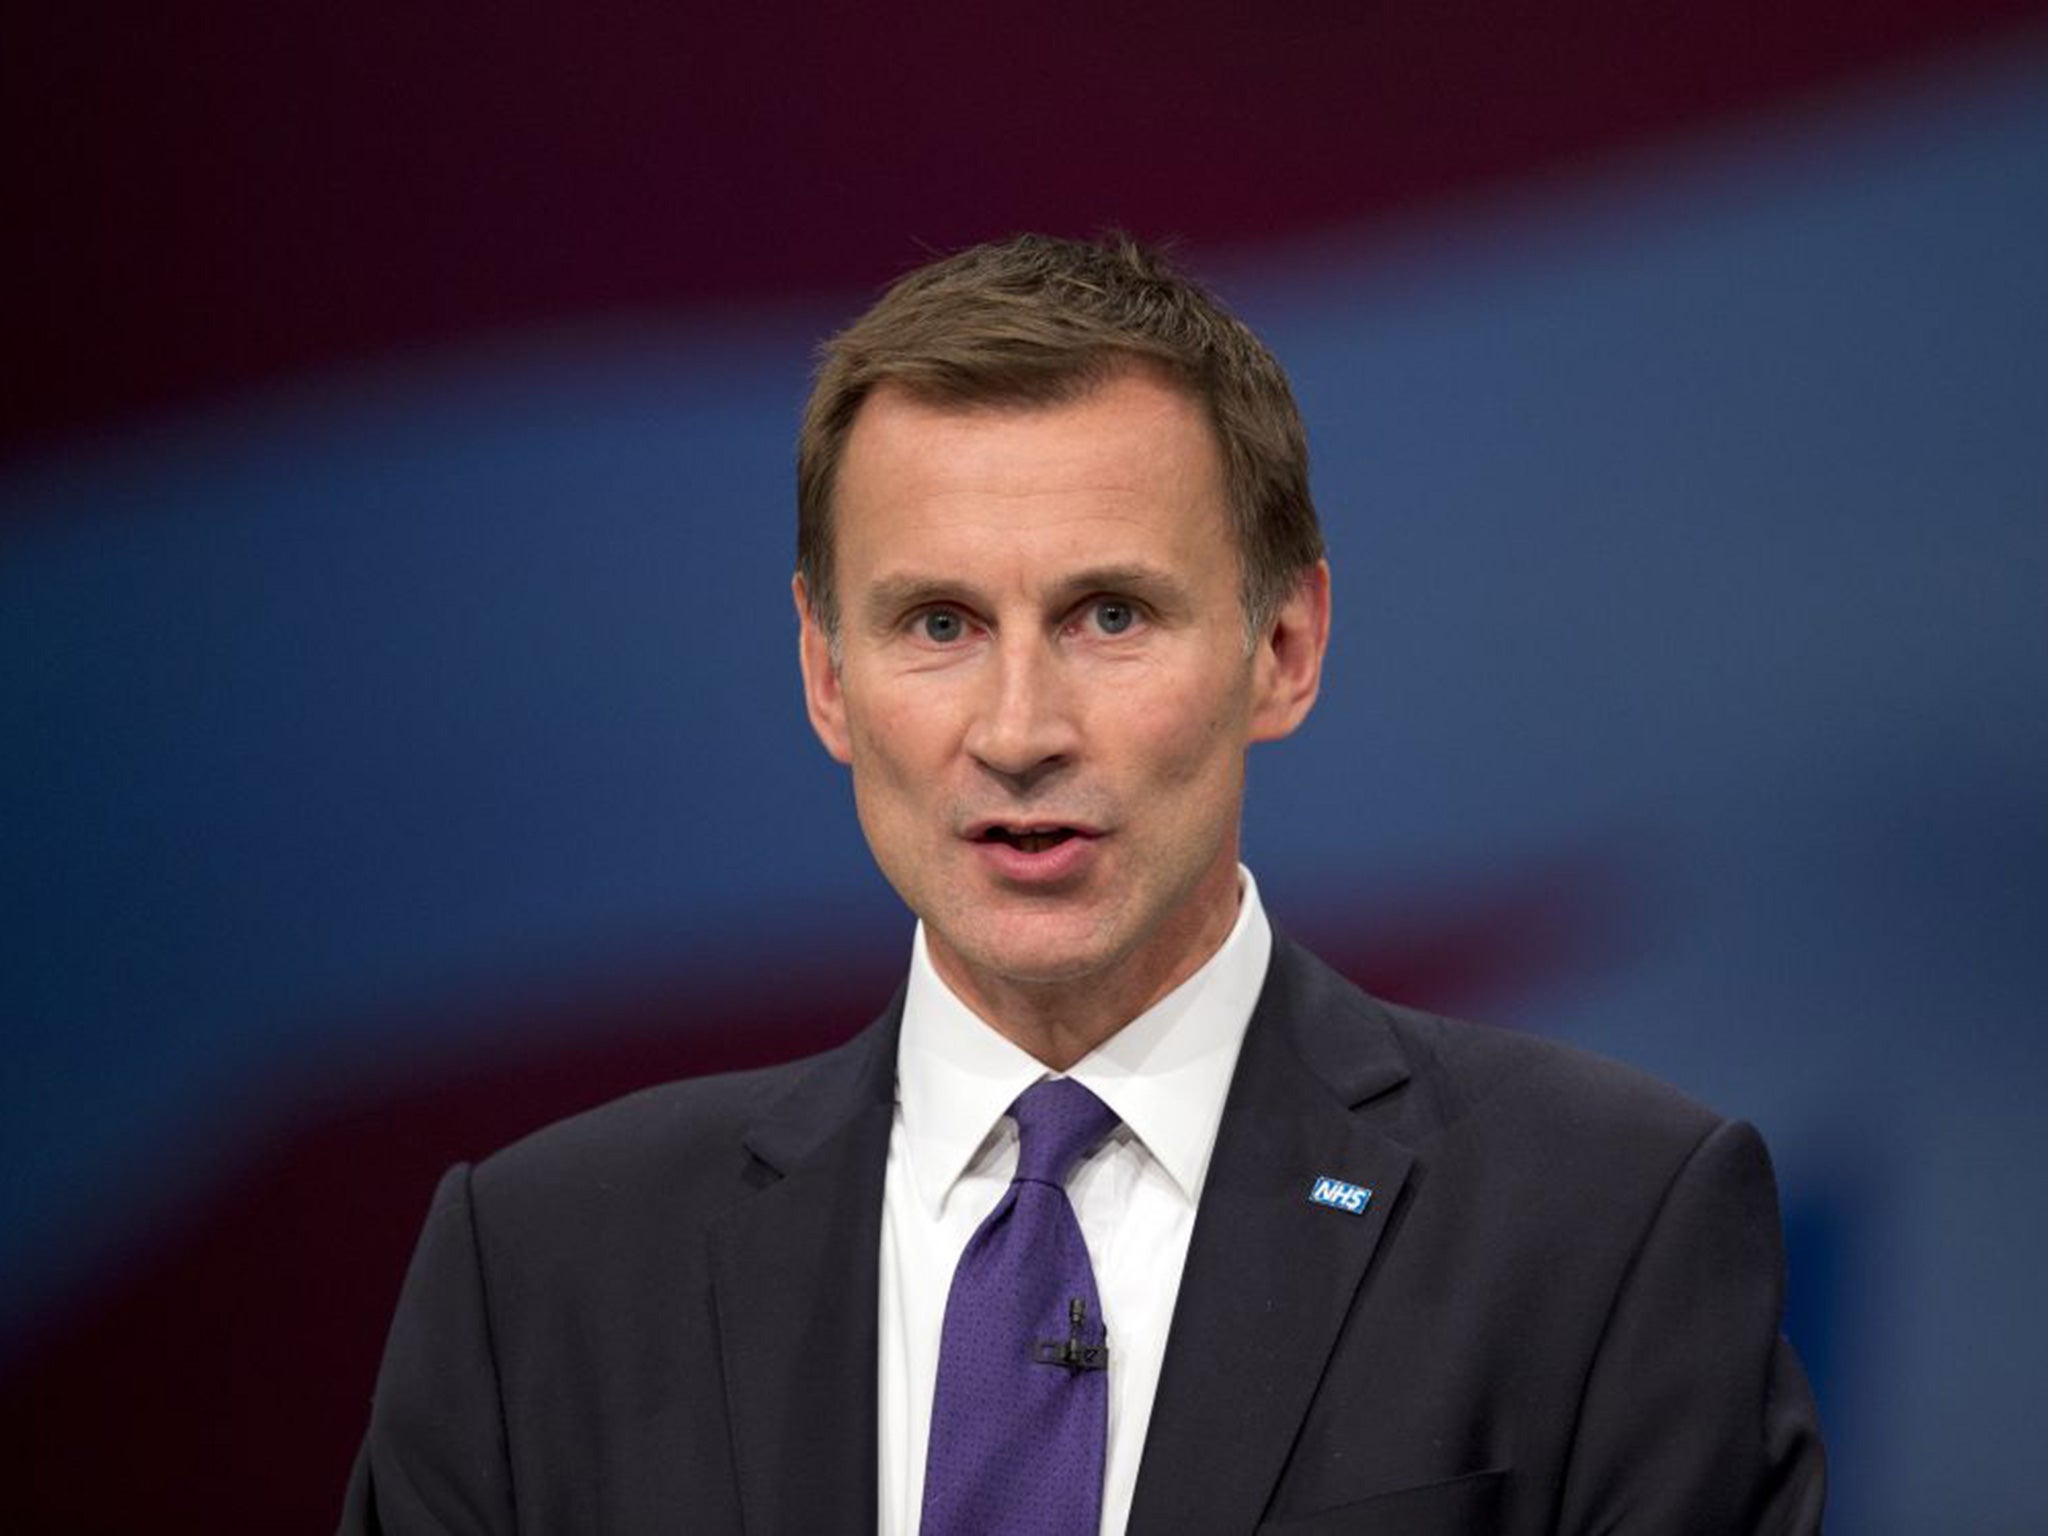 Sir Robert said that Jeremy Hunt and the government had mishandled talks with junior doctors